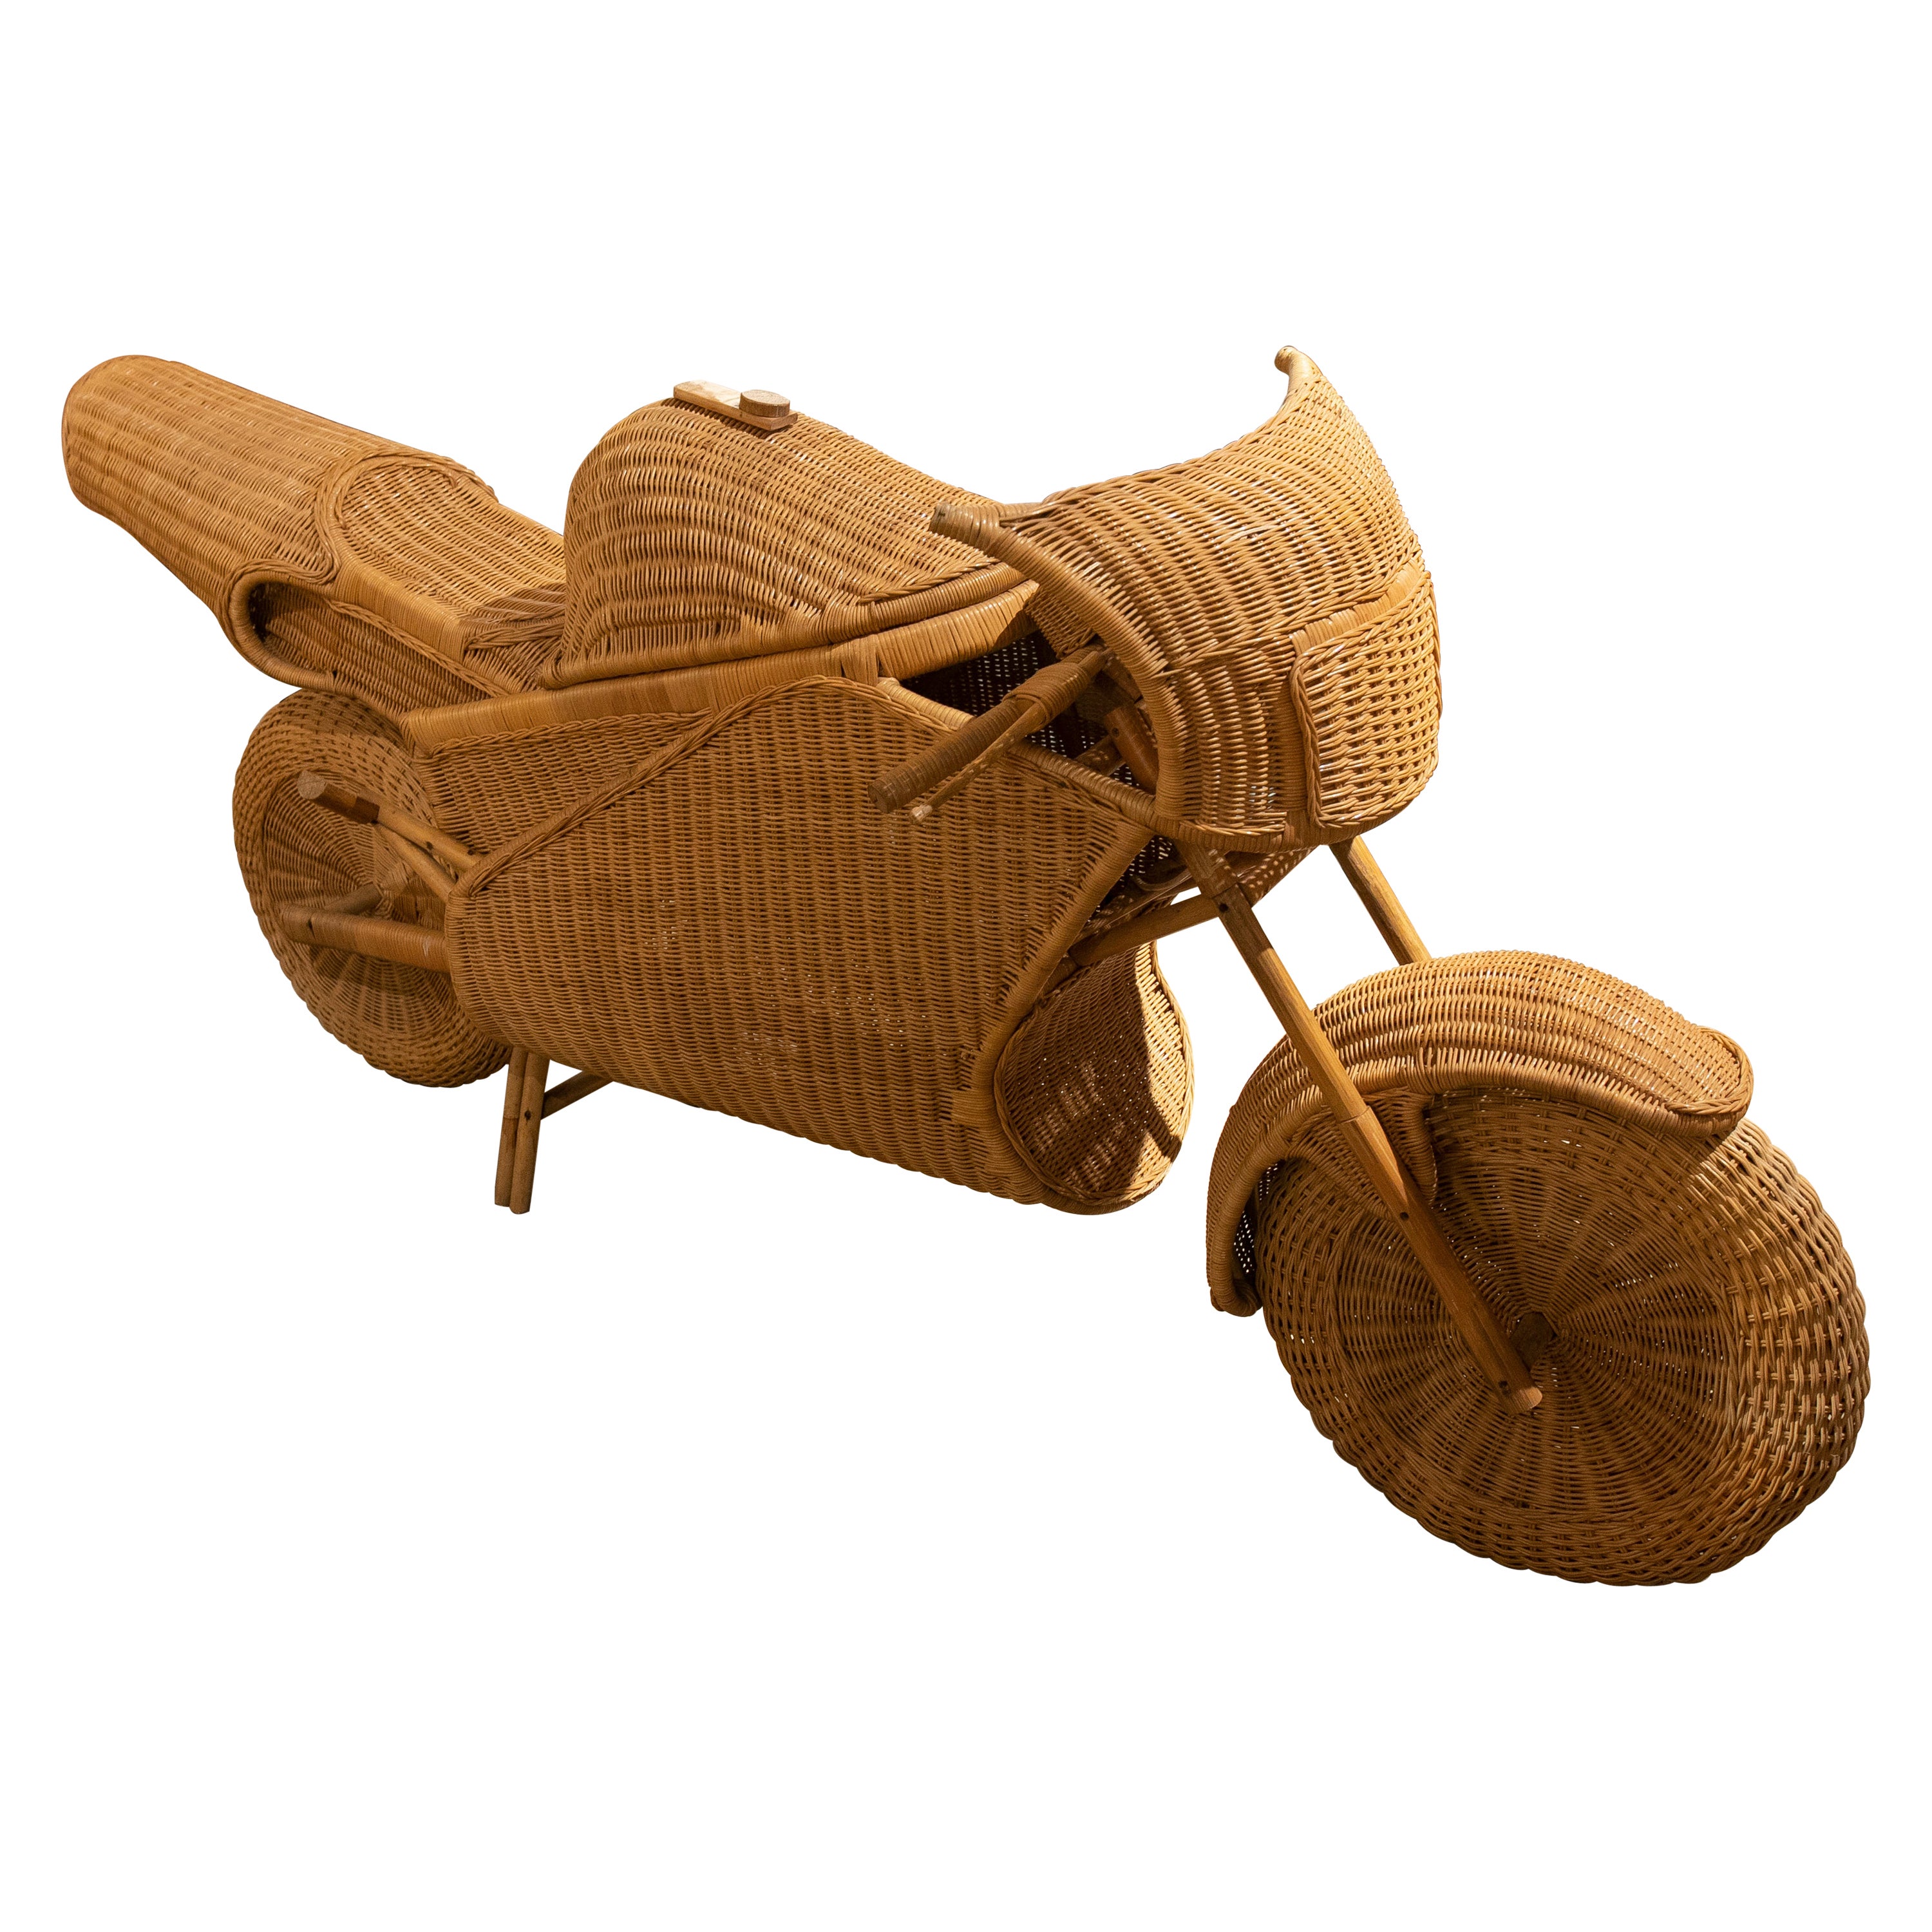 1970s Handmade Wicker and Bamboo Racing Motorcycle For Sale